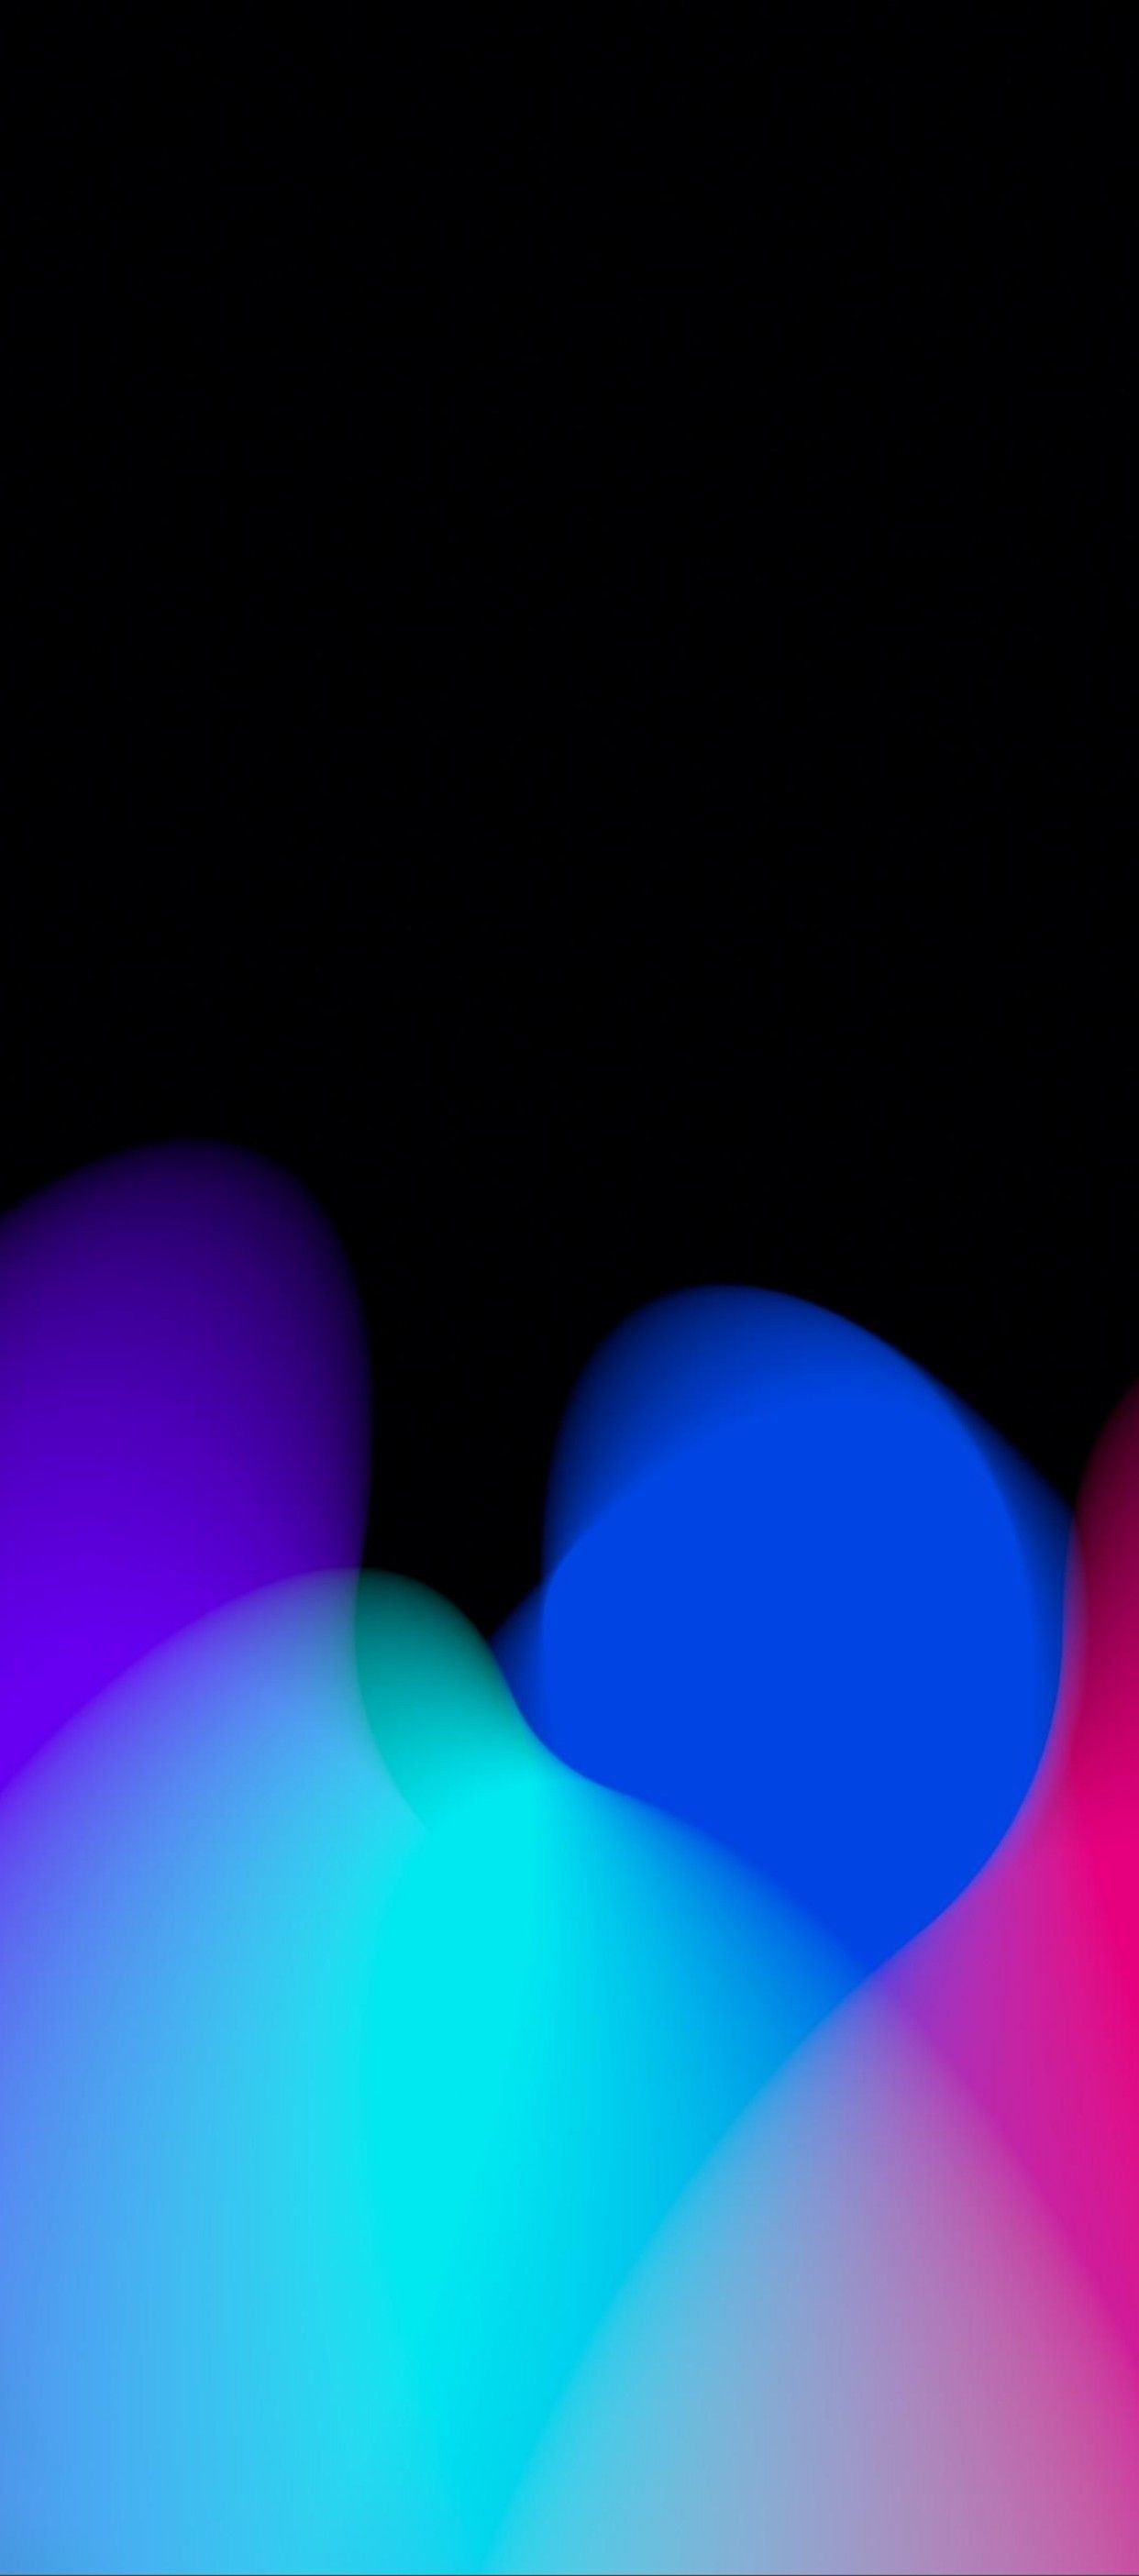 1242x2809 iOS 11, iPhone X, black, red, purple, blue, clean, simple, abstract, apple,  wallpaper, iphone 8, clean, beauty, colour, iOS, minimal